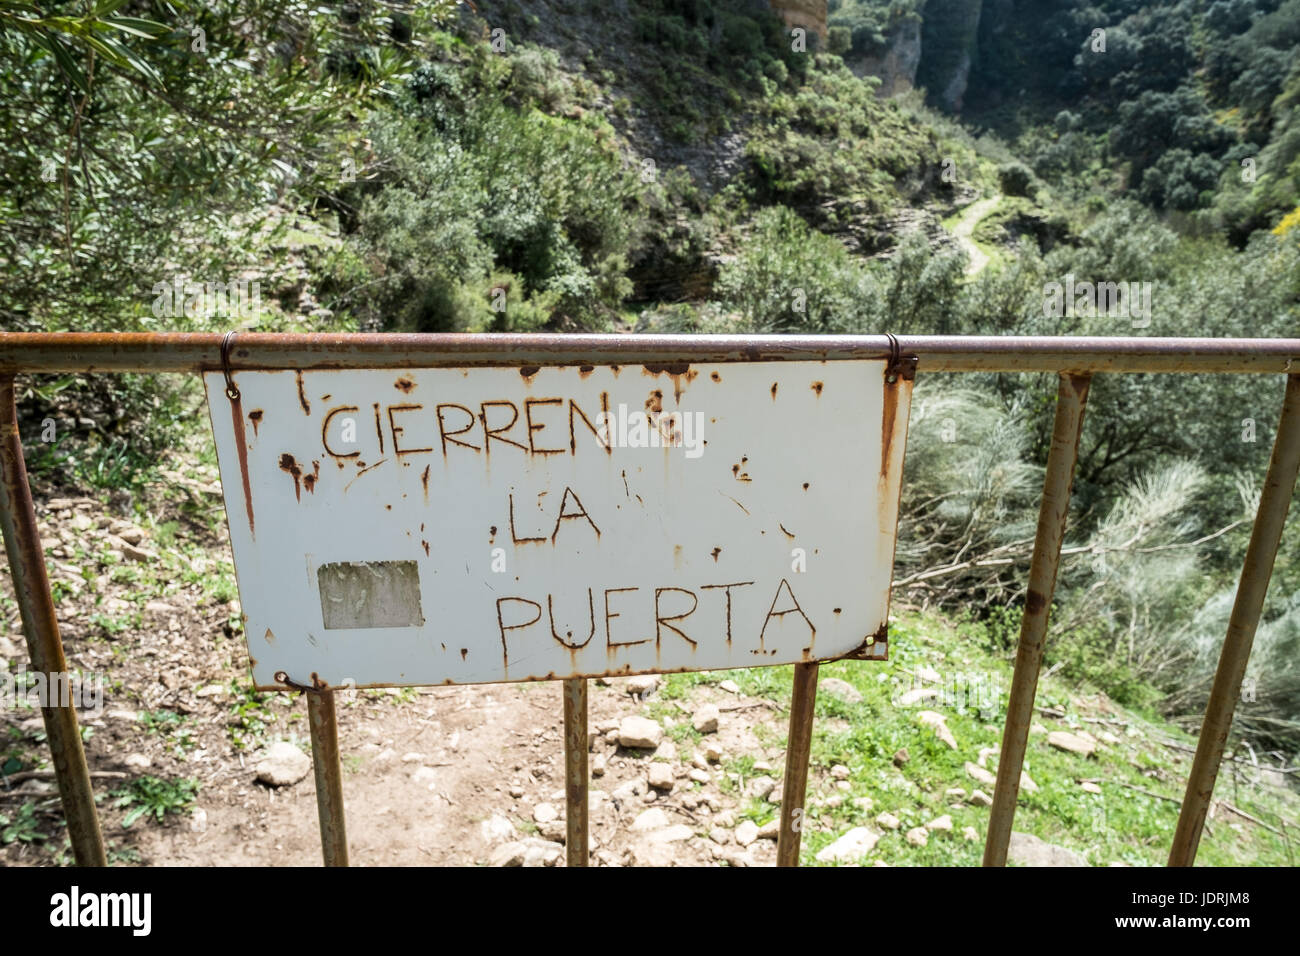 Country sign to cierren la puerta, shut the gate, in rural Ronda, Andalucia, Spain Stock Photo